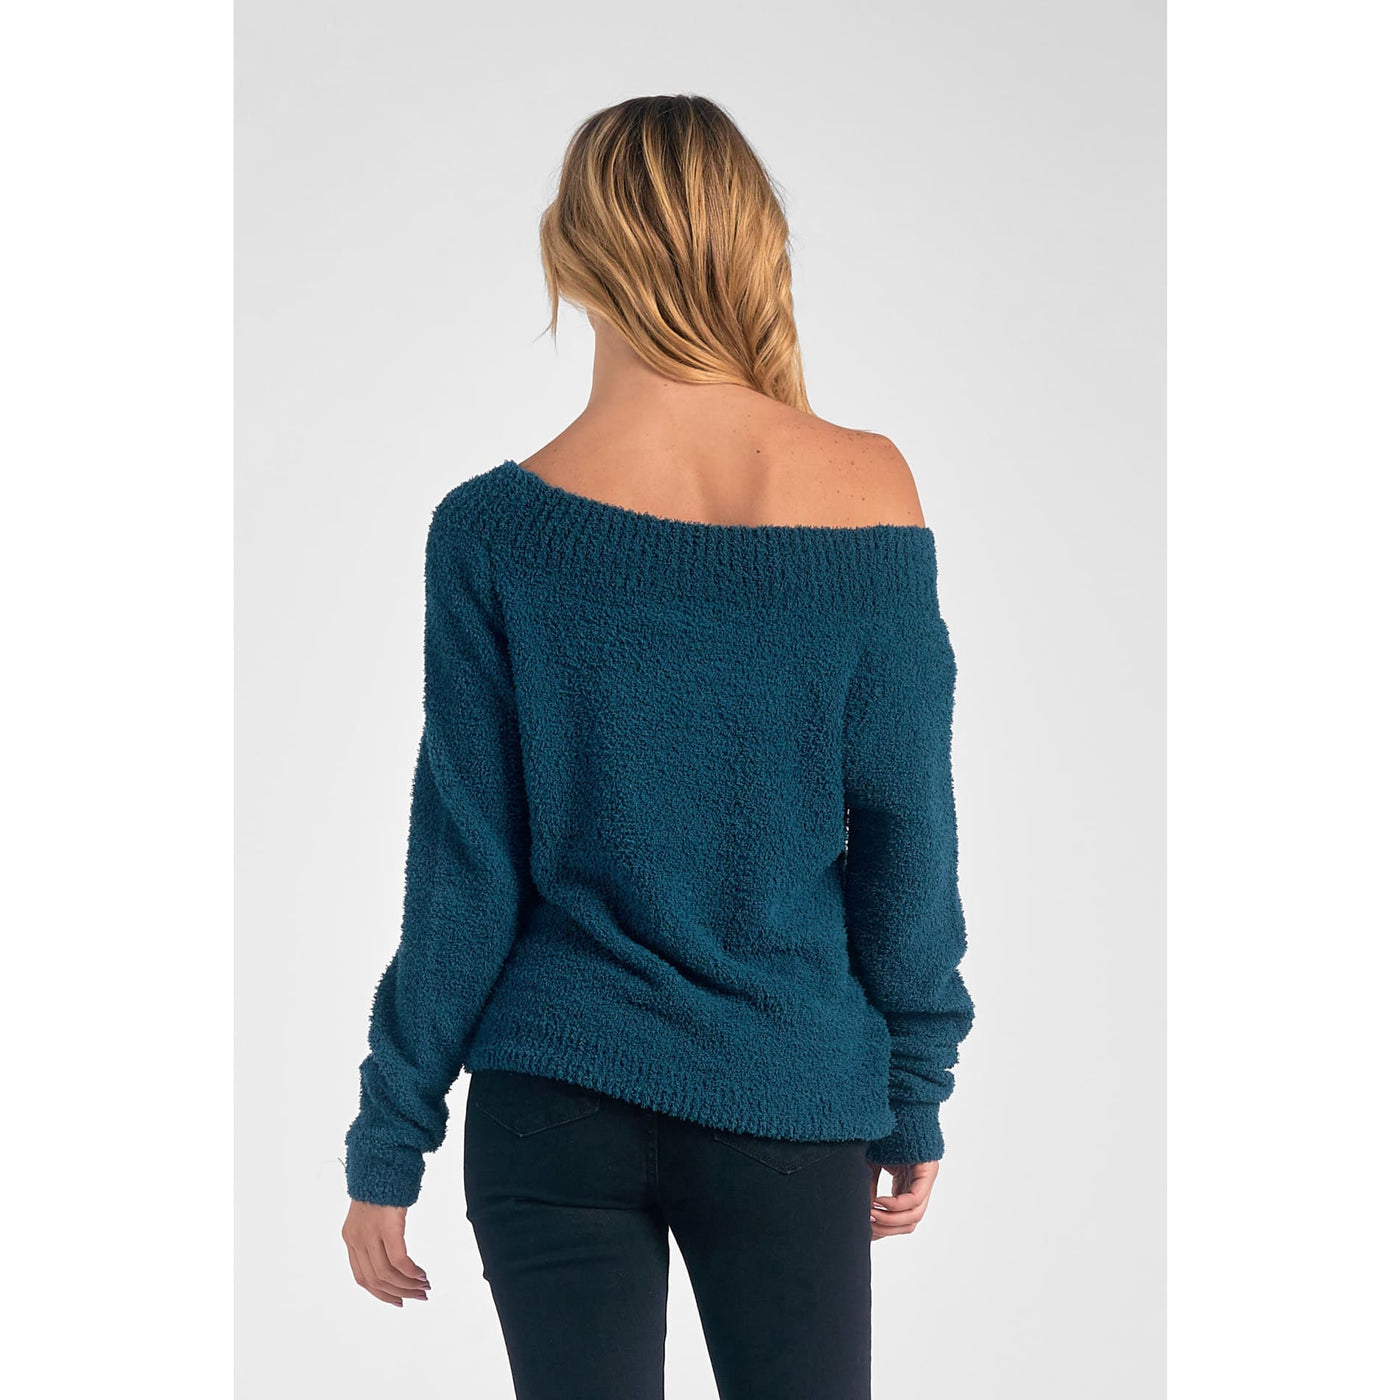 Keeping Dreams Alive Sweater - 130 Sweaters/Cardigans